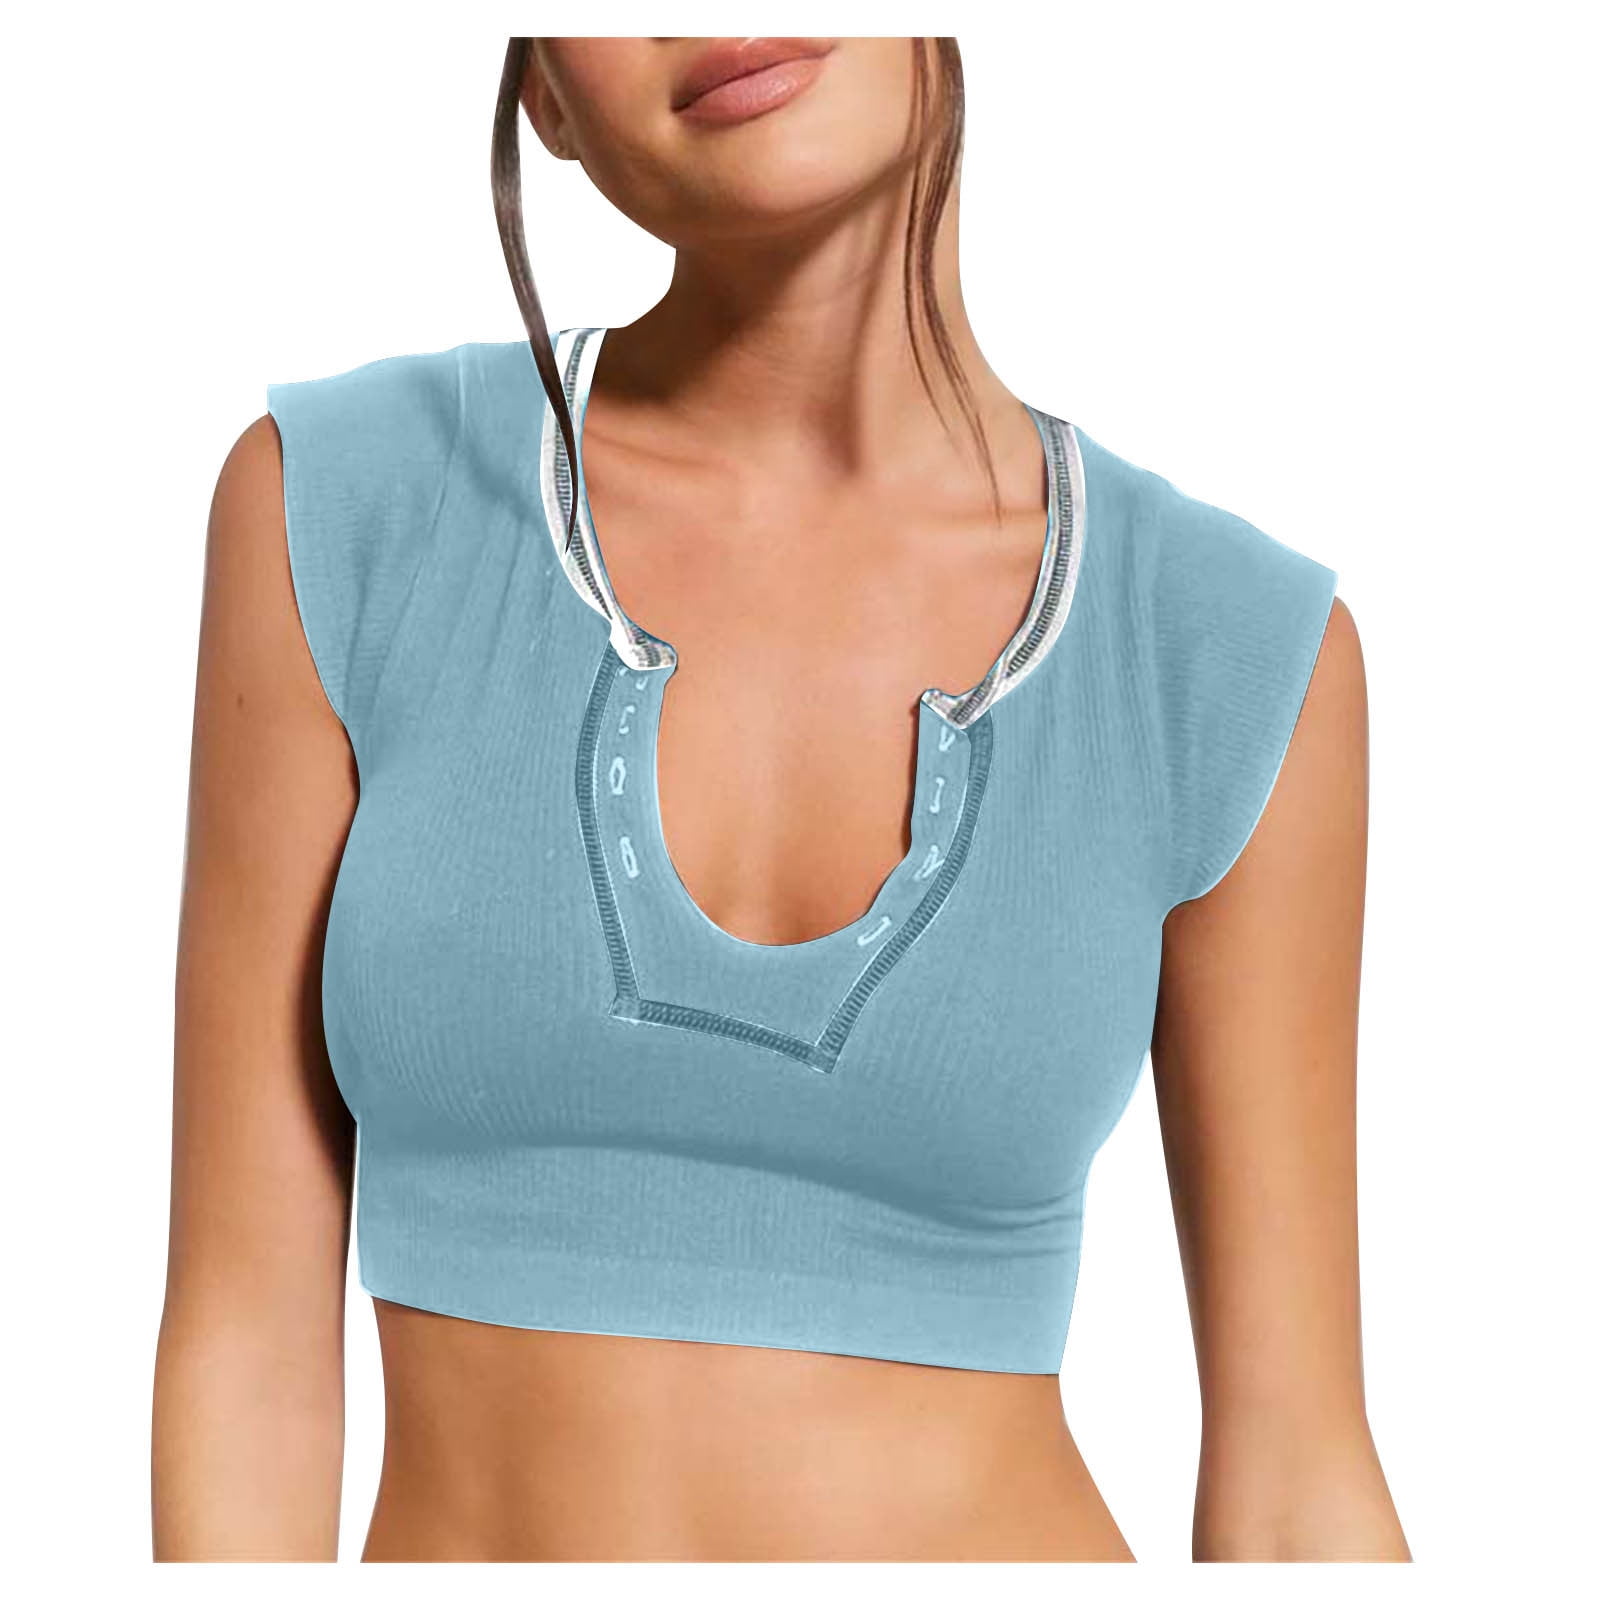 Crop Tops for Women Cap Sleeve Notch V Neck Workout Tops Summer Going out Top  Tee Shirts Slim Fitting Solid Color (Medium, Blue) 